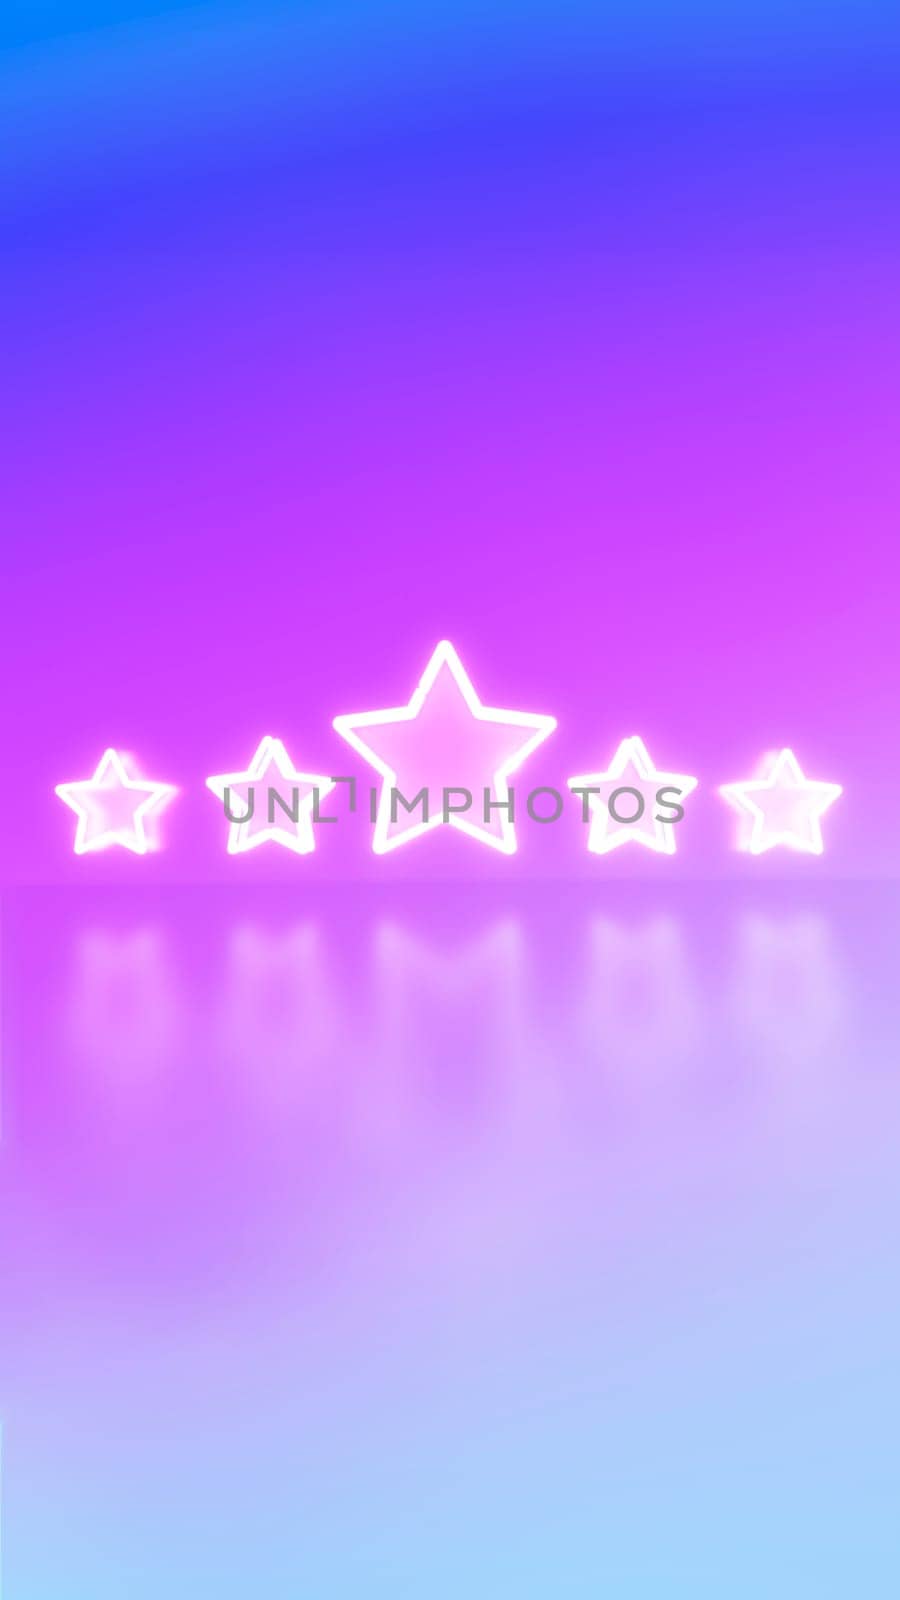 Neon light style 5 stars user rating for feedback or survey on purple gradient background. by ImagesRouges